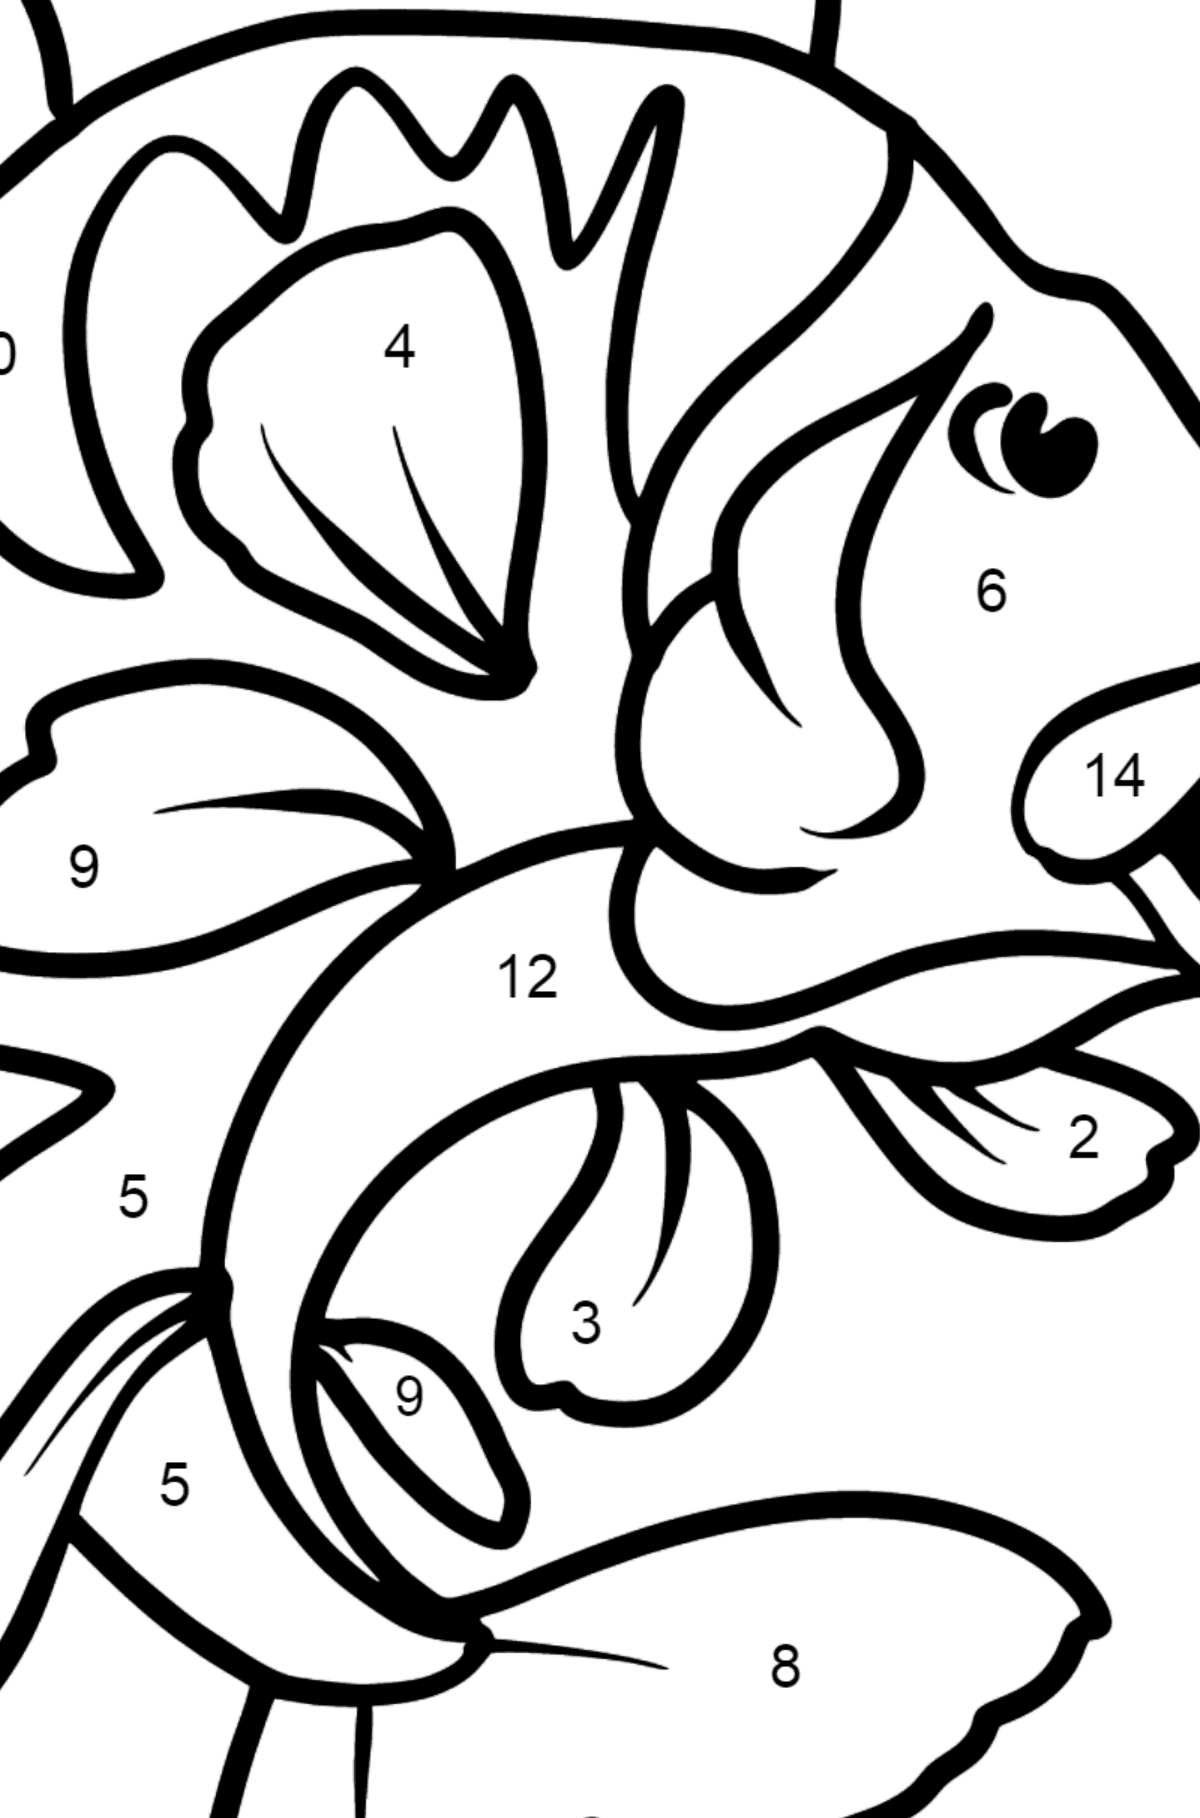 Perch coloring page - Coloring by Numbers for Kids